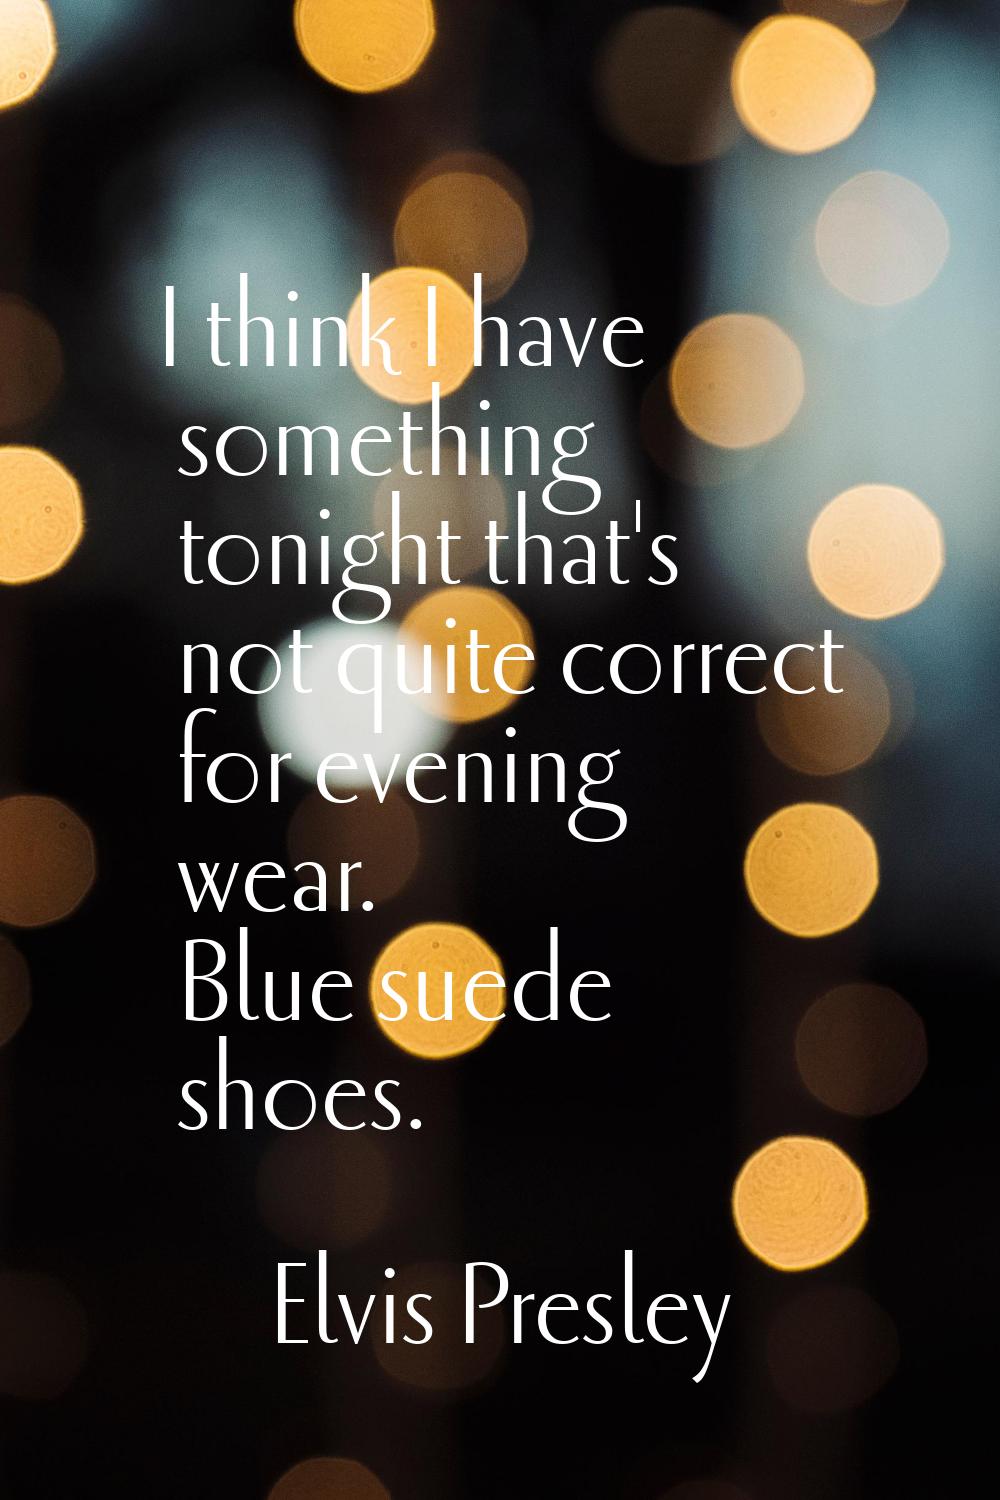 I think I have something tonight that's not quite correct for evening wear. Blue suede shoes.